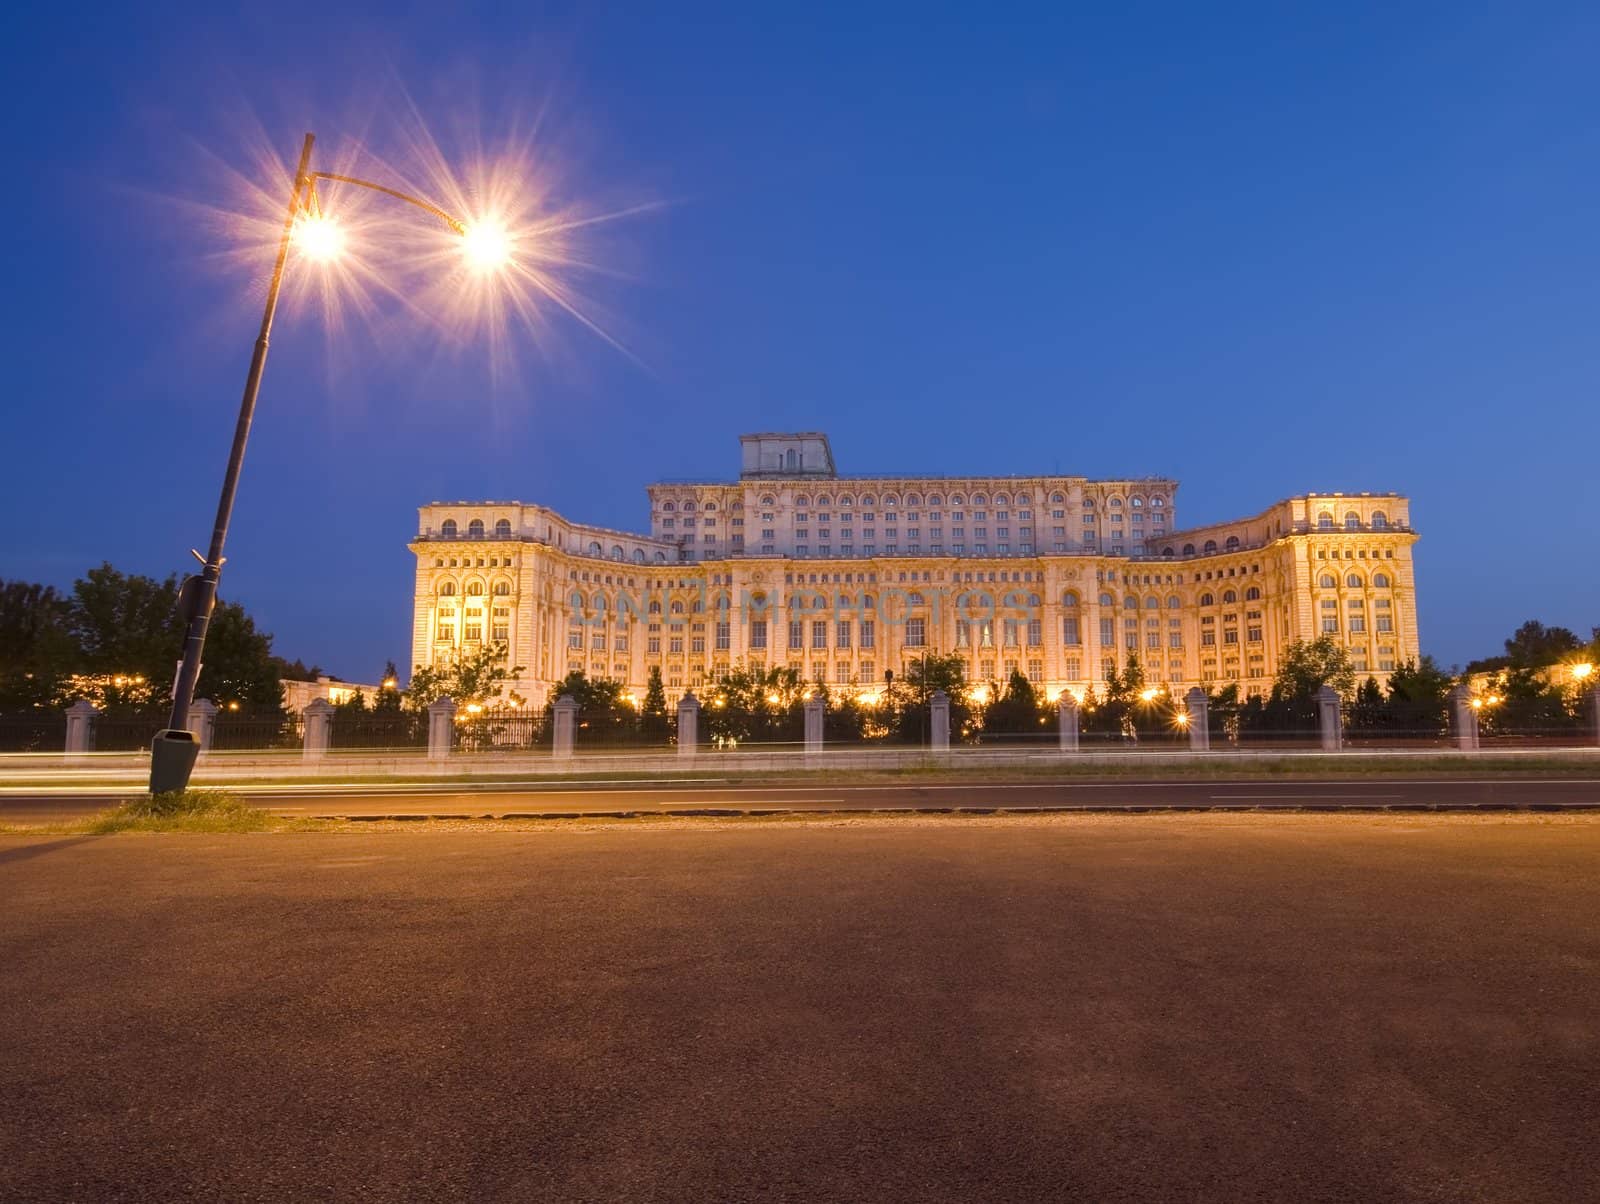 The Palace of the Parliament in Bucharest, Romania built by Ceausescu